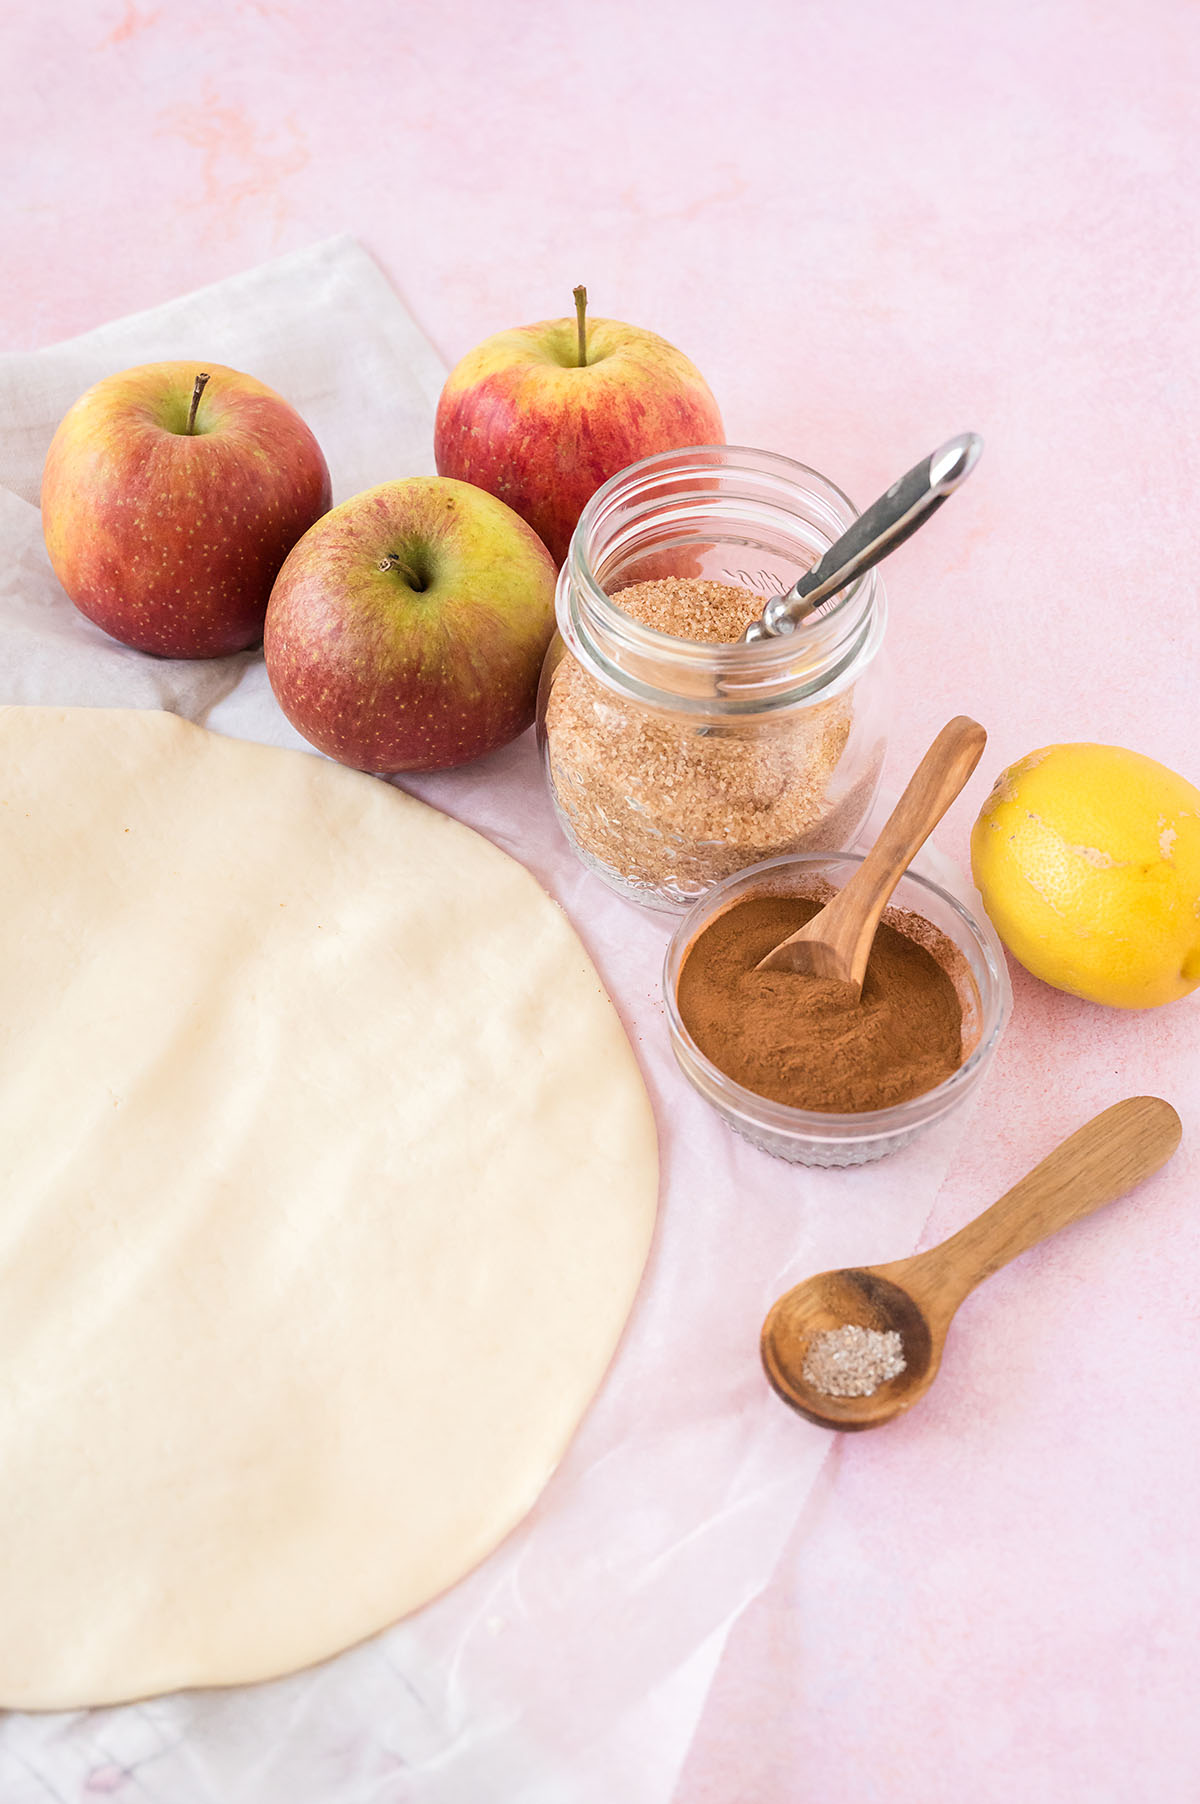 Ingredients for an apple galette on a countertop.